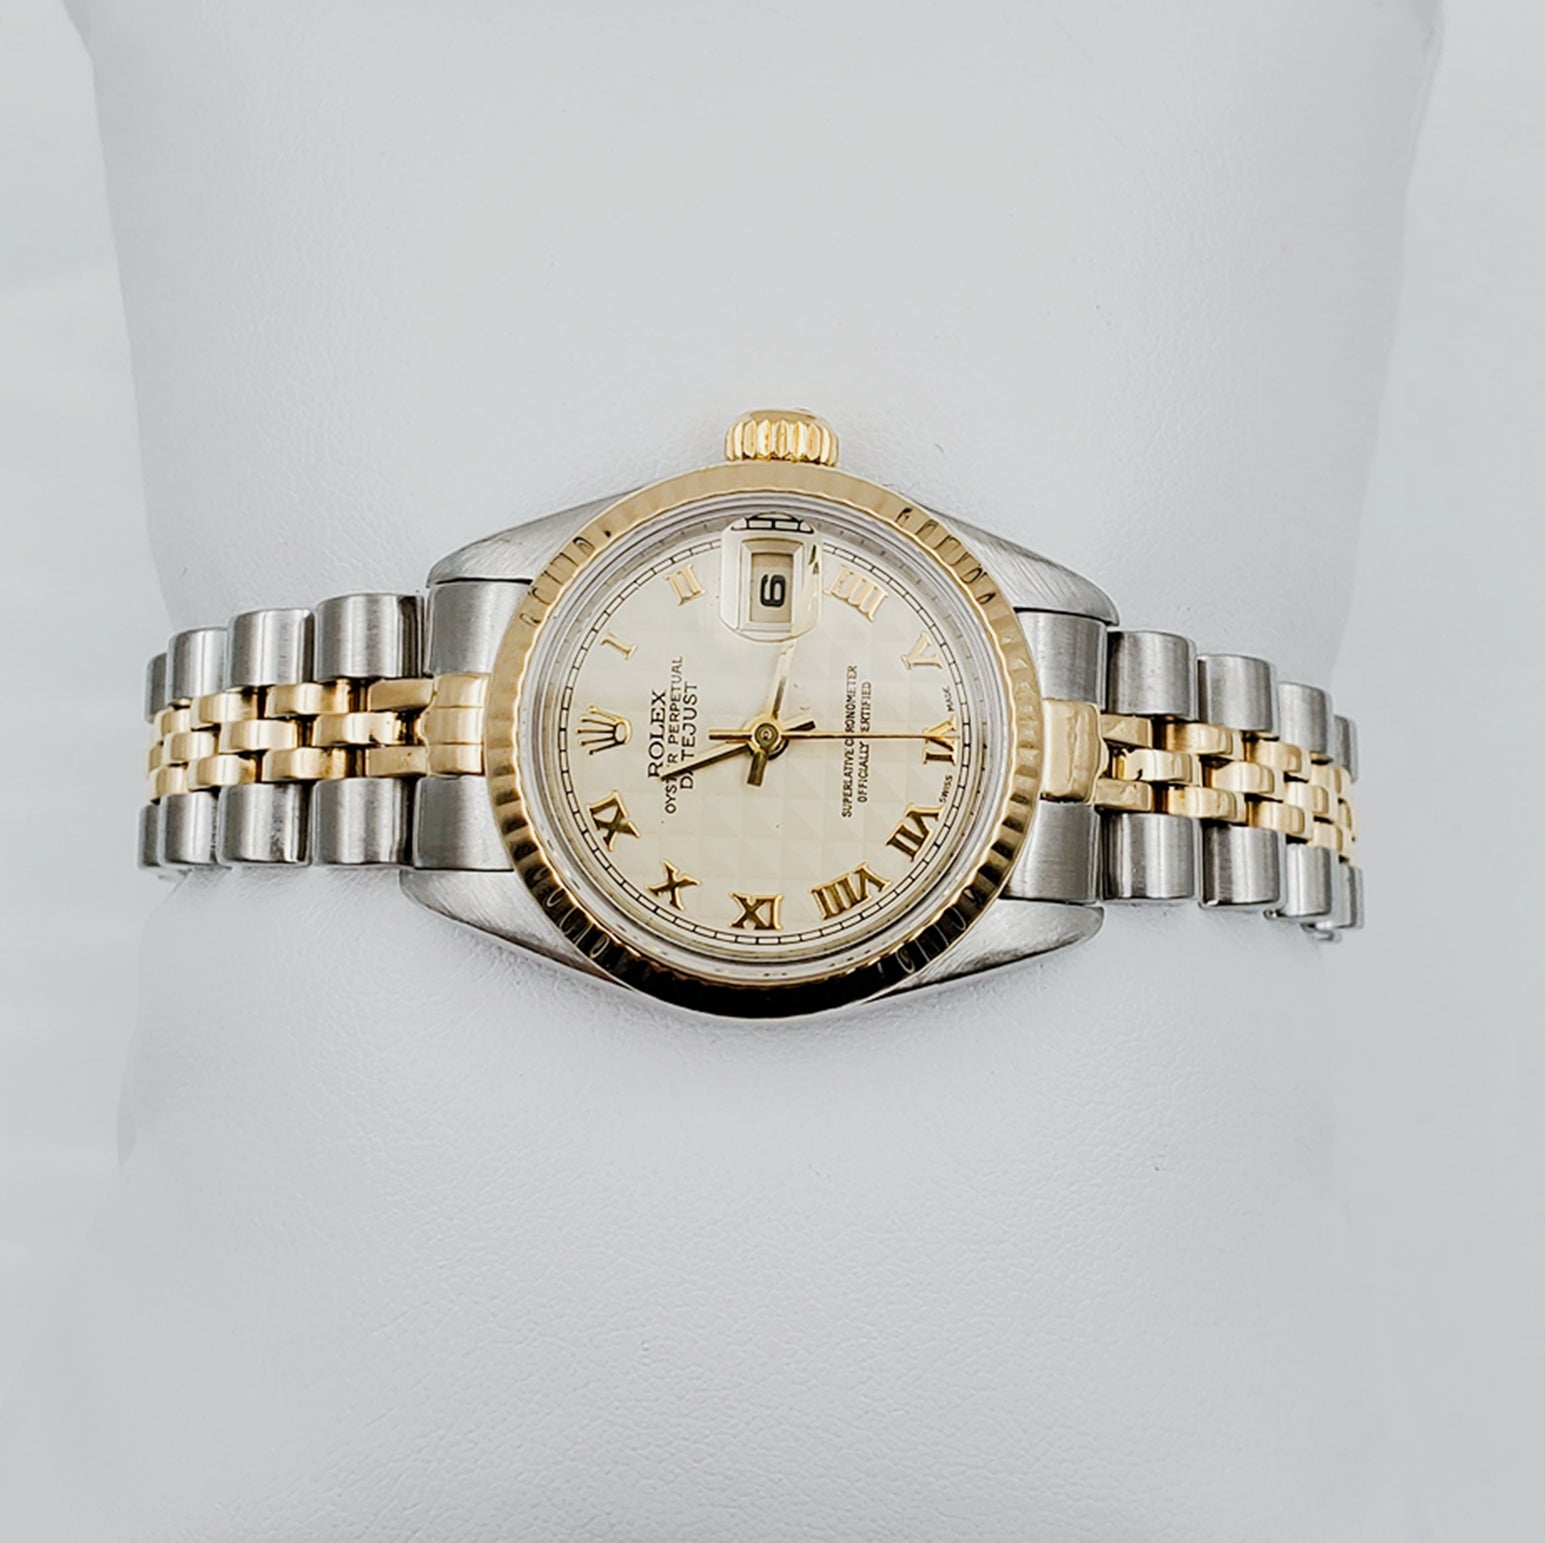 Ladies Rolex 26mm DateJust Two Tone 18K Gold / Stainless Steel Watch with 3D Gold Dial and Fluted Bezel. (Pre-Owned 16233)